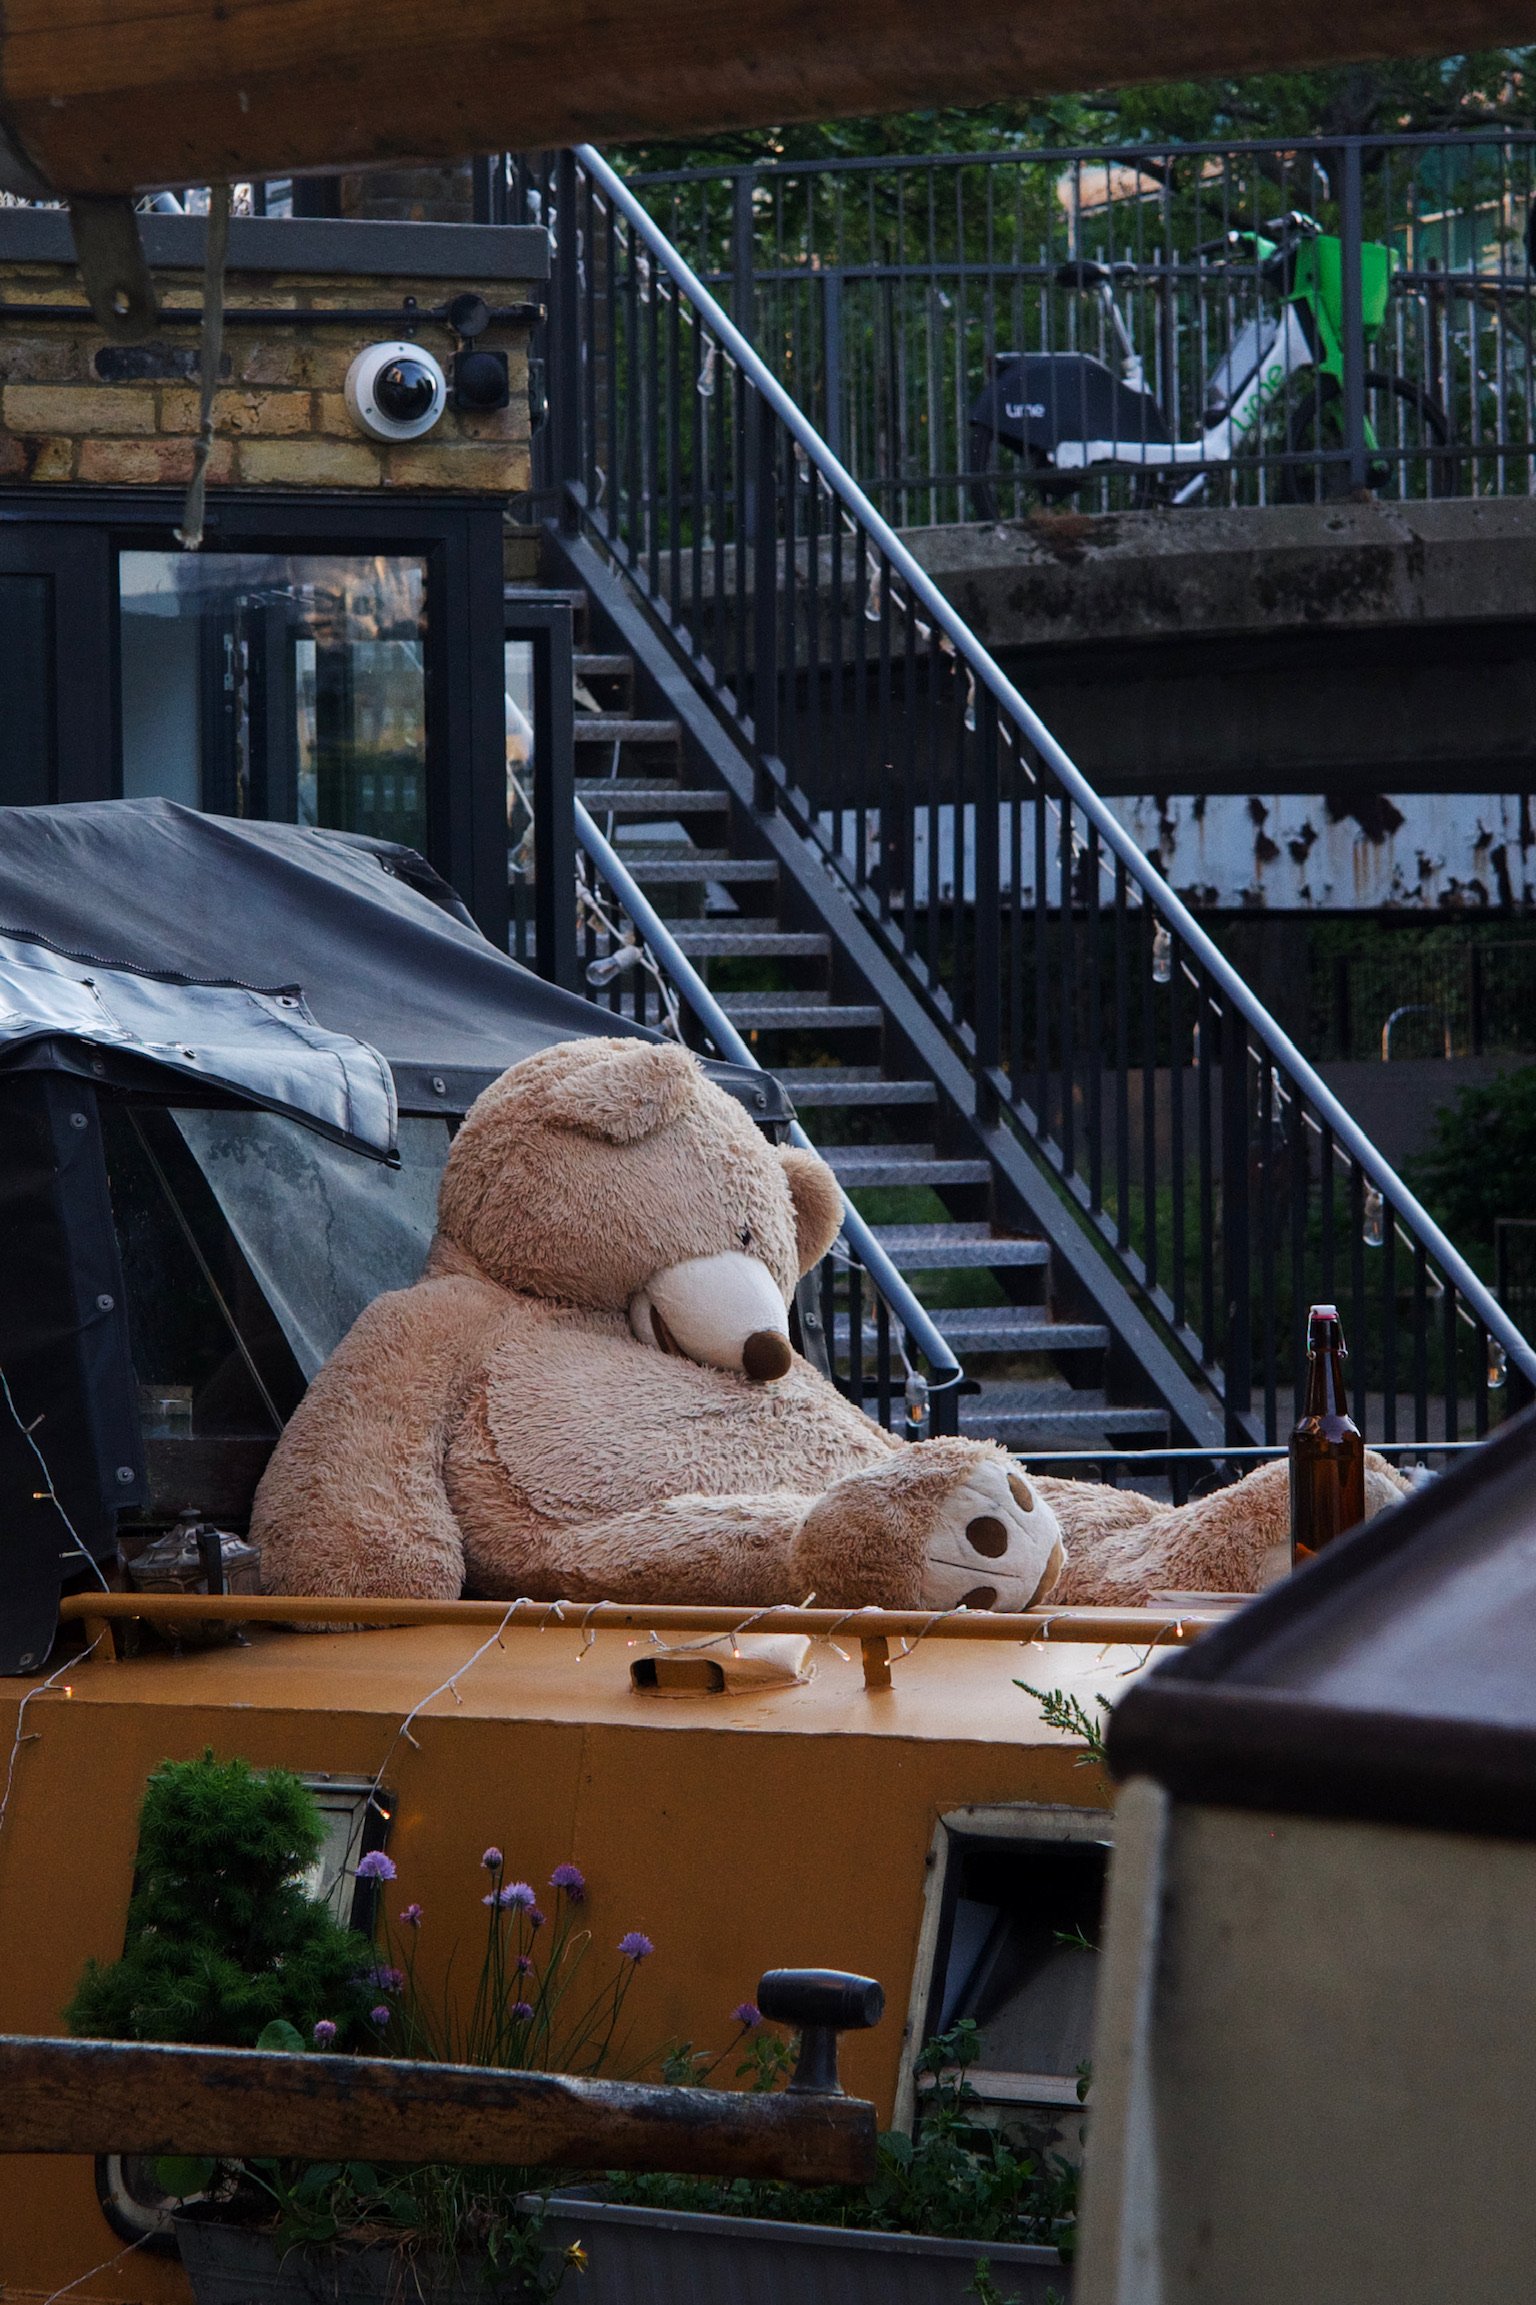 A giant bear plushy looking defeated on the roof of a house boat with a beer bottle by it.